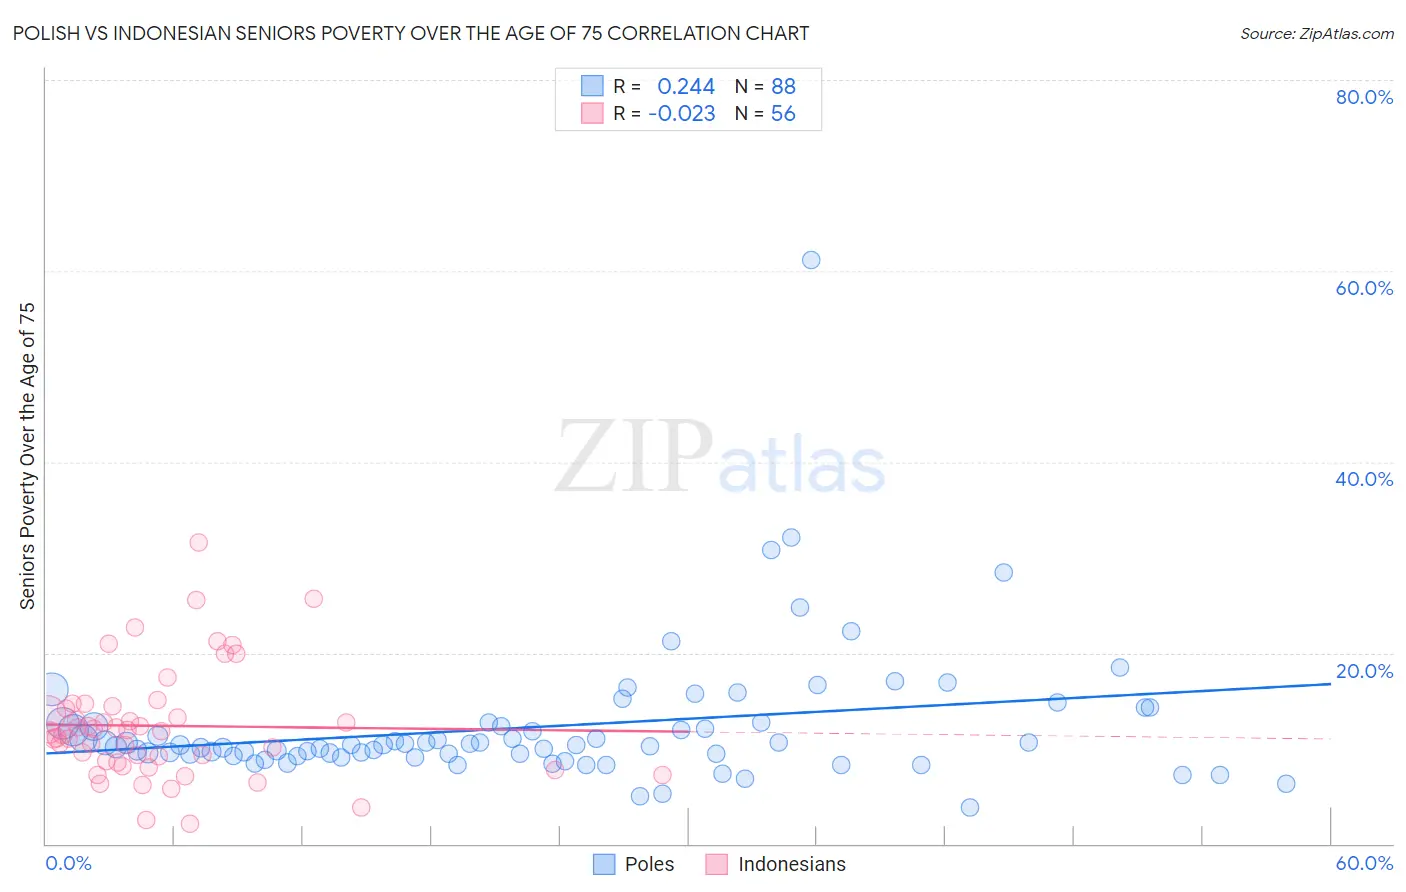 Polish vs Indonesian Seniors Poverty Over the Age of 75